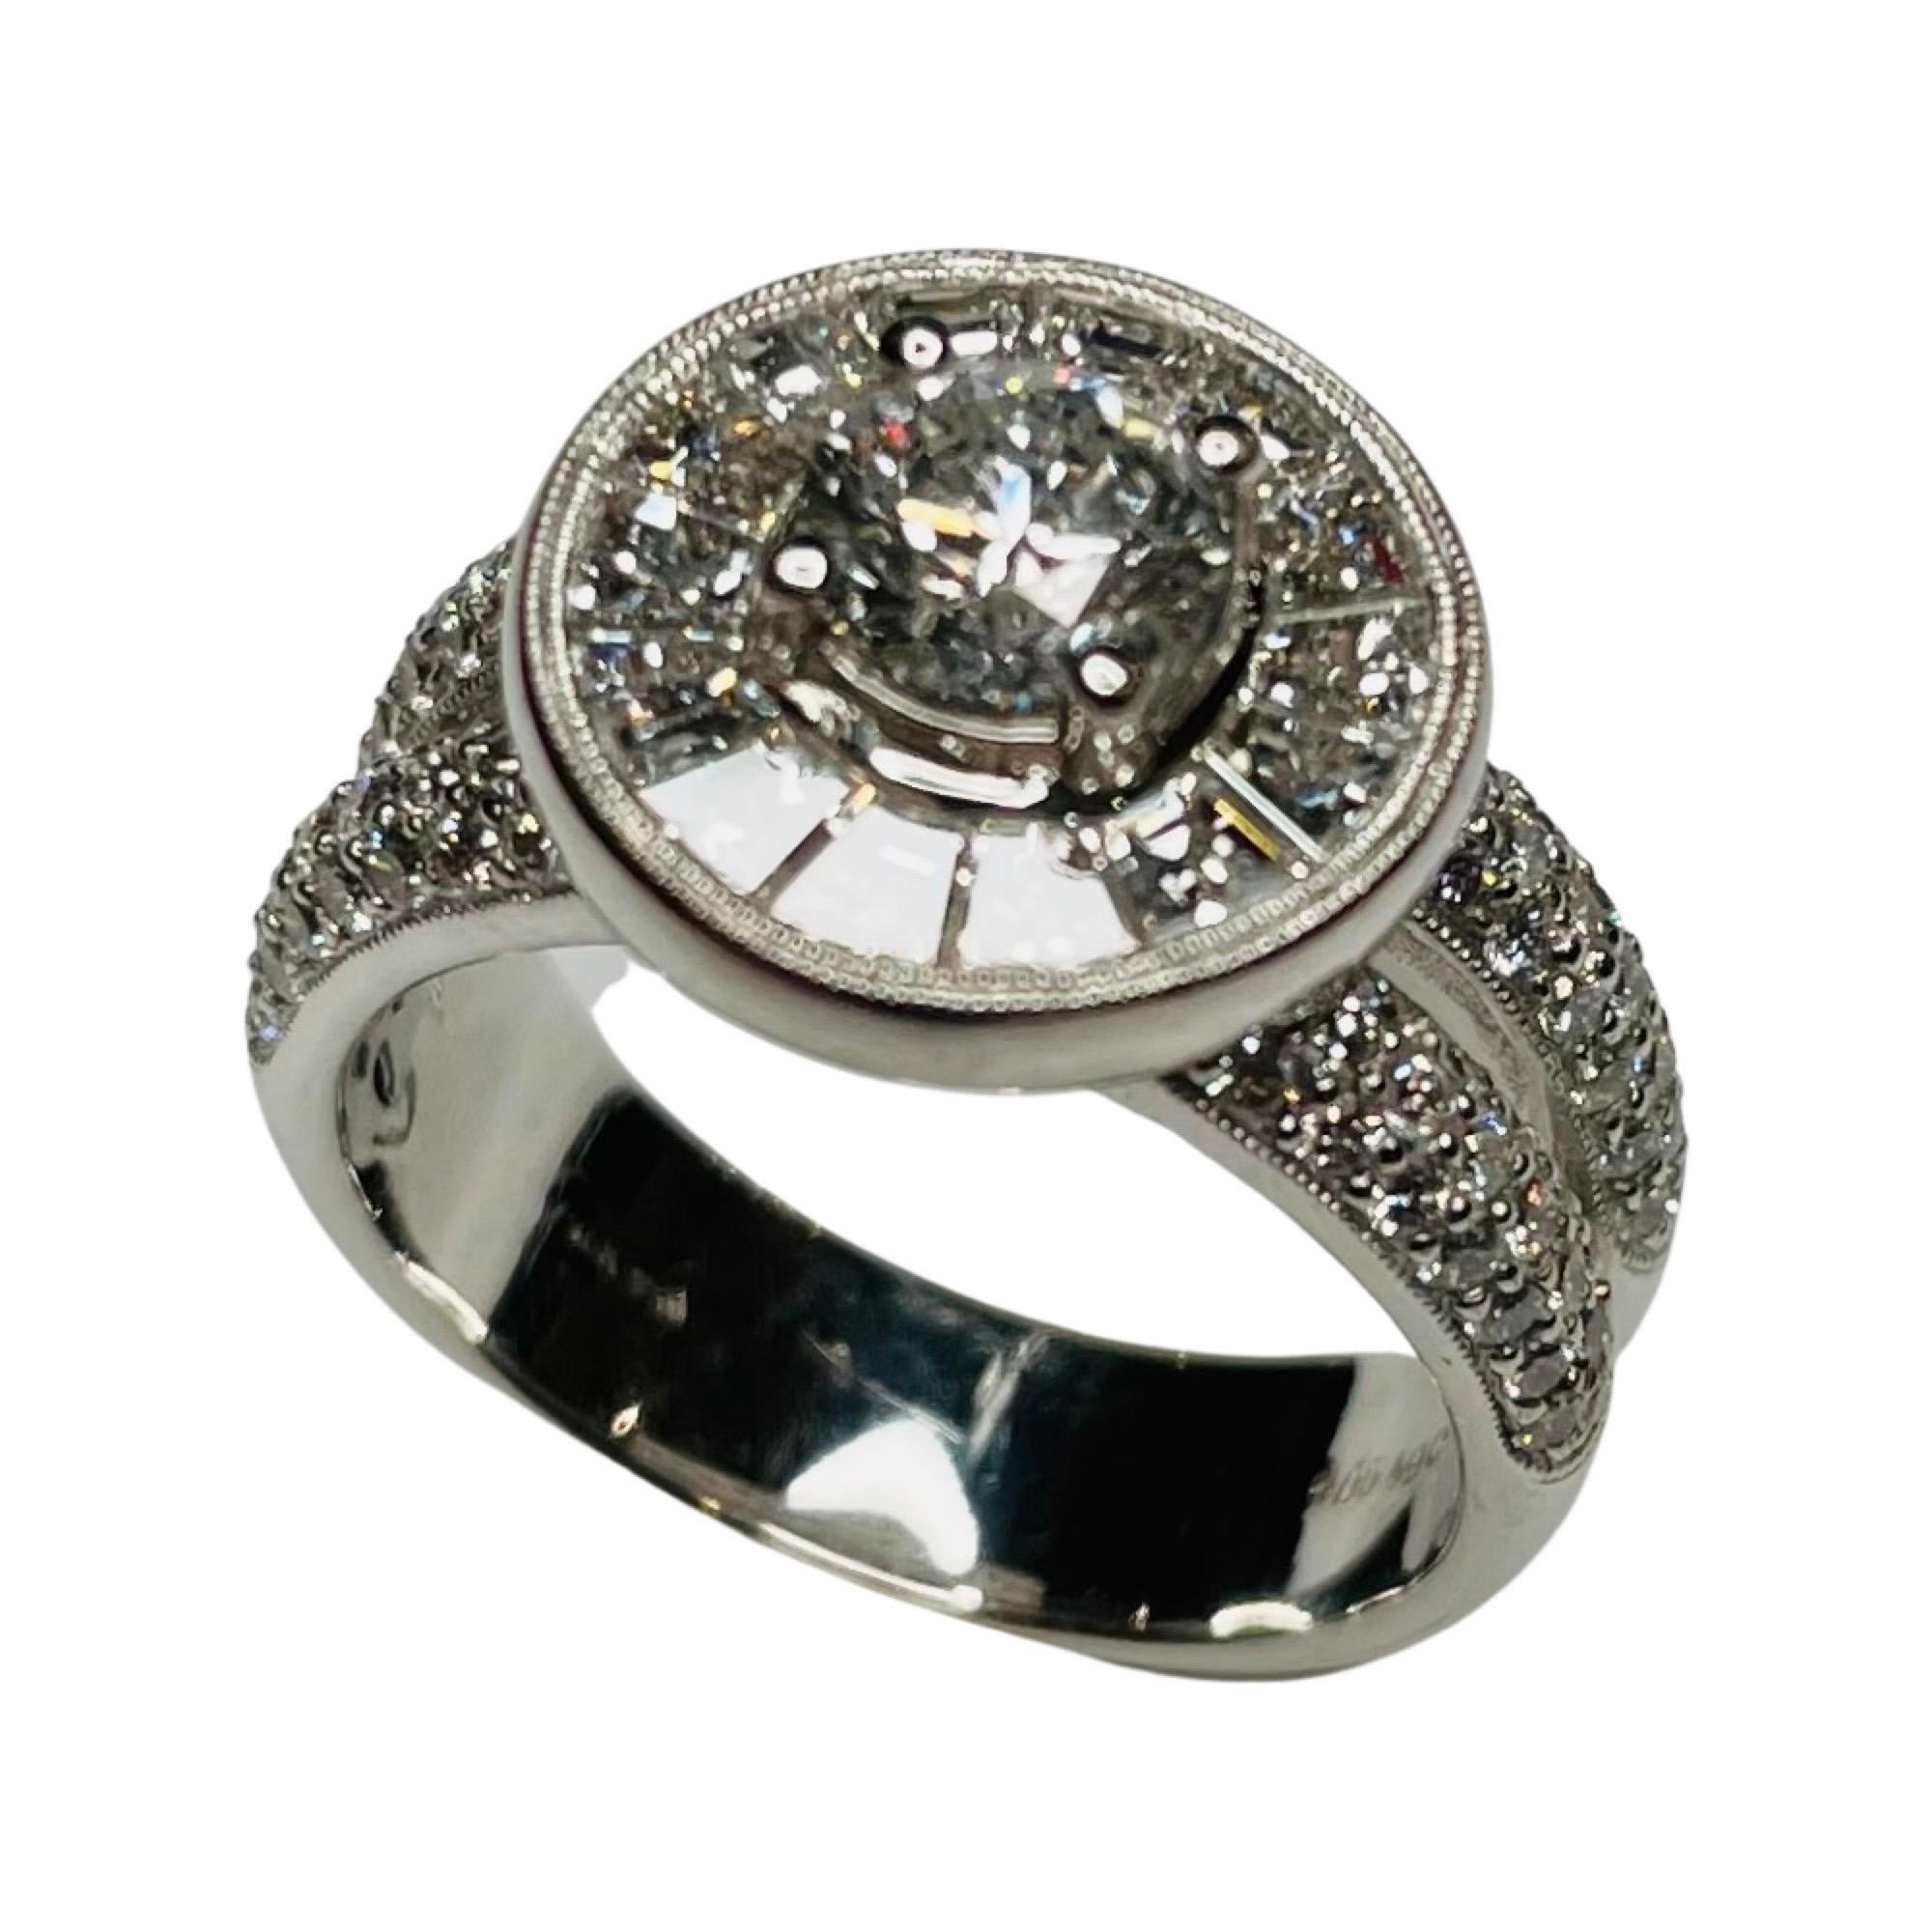 Simon G 18K White Gold and Diamond Ring. The center diamond is 0.73 carats. It is 4 prong set. It is VS2 clarity and G color. It is surrounded by 14 tapered baguettes channel set. They have a total weight of 1.19 carats. They are VS clarity and G